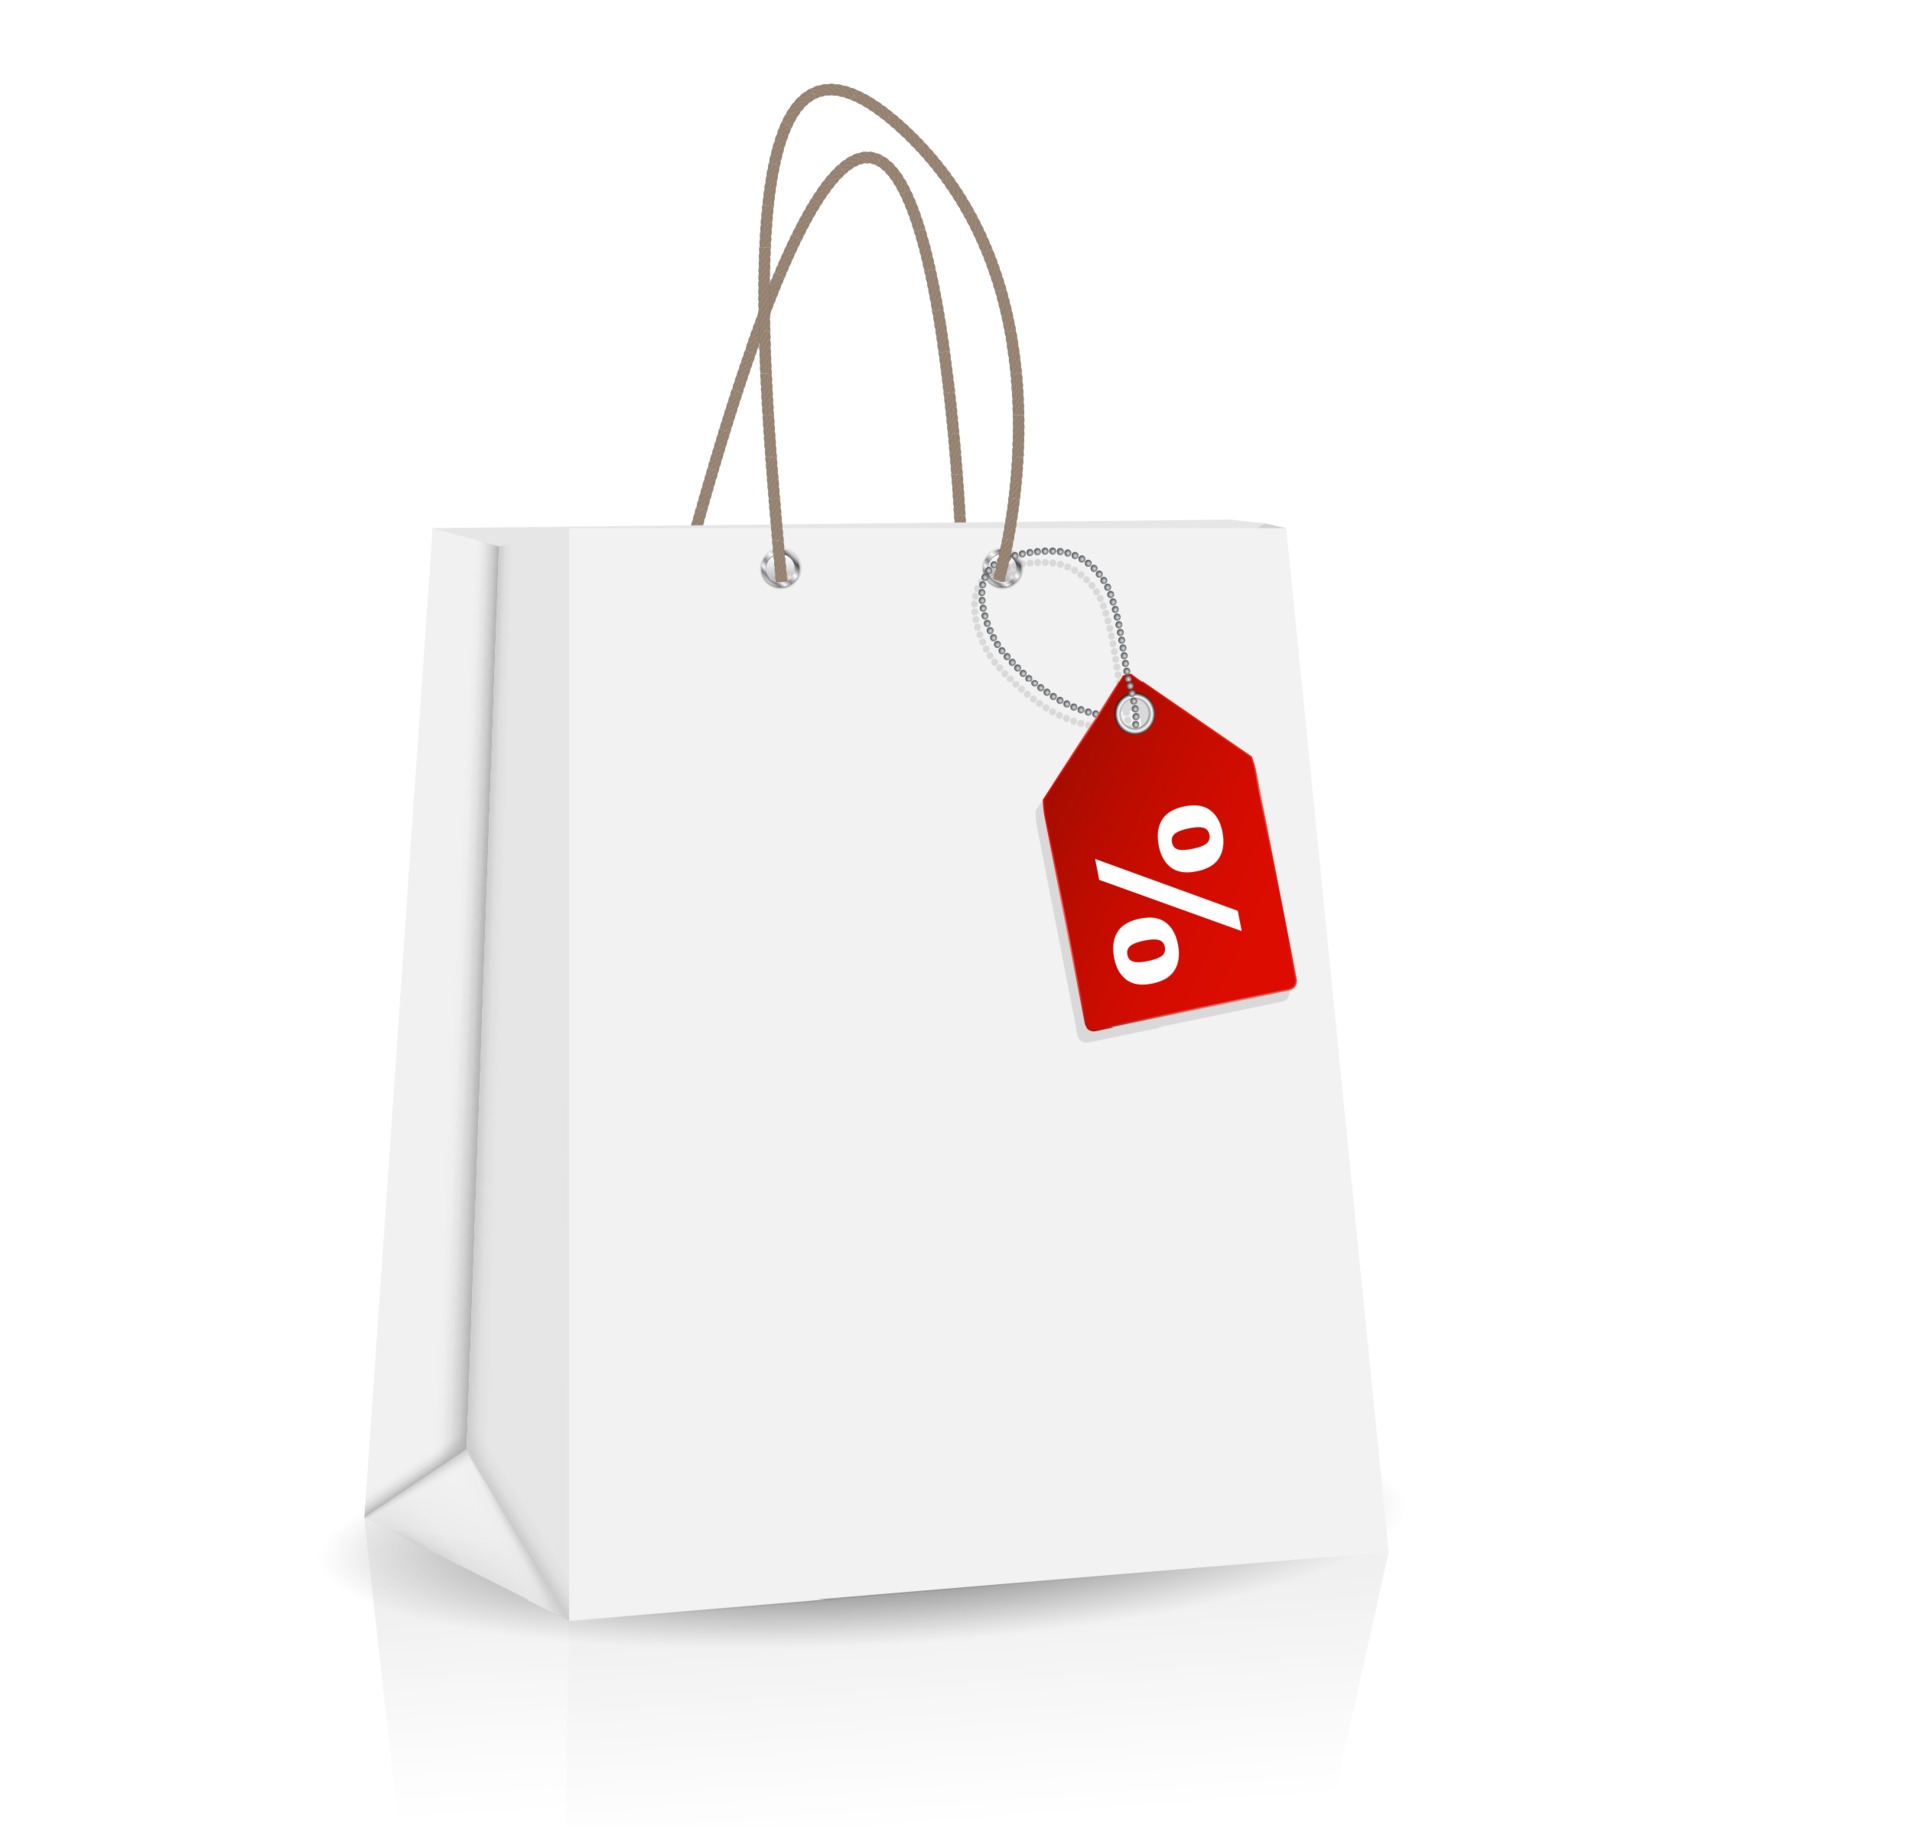 original product vs dupe imitation conceptual still-life, shopping bags  with labels side by side with similar paper color symbol of cheap product  alte Stock Photo - Alamy